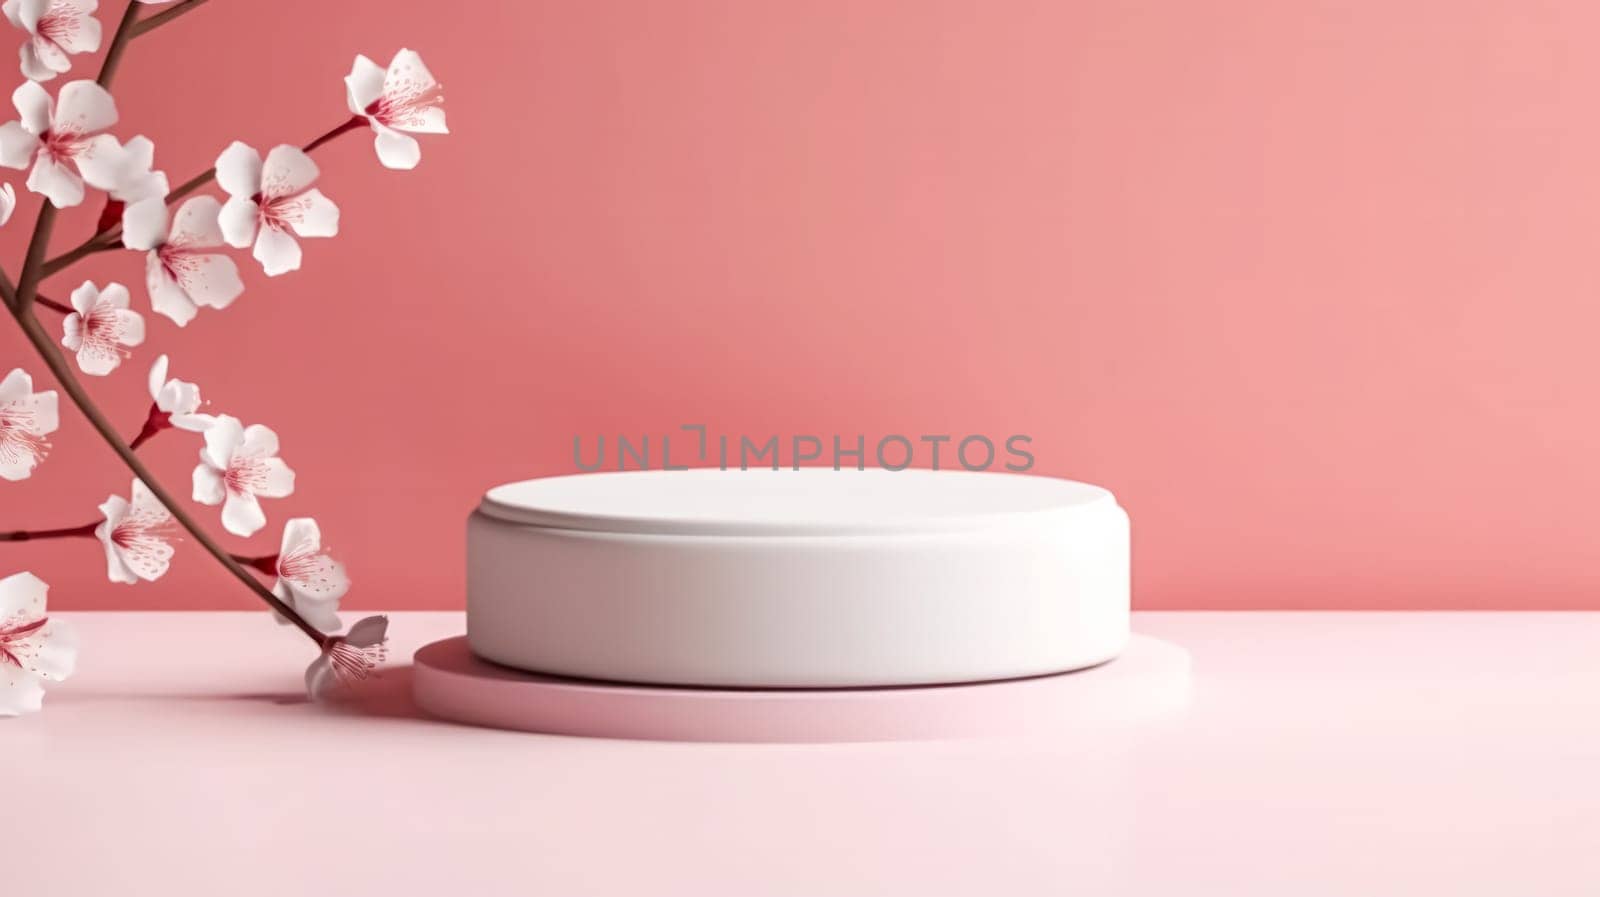 Elegant white podium standing on a serene beige background, adorned with delicate branches of cherry blossoms. Perfect for showcasing sophistication and beauty.